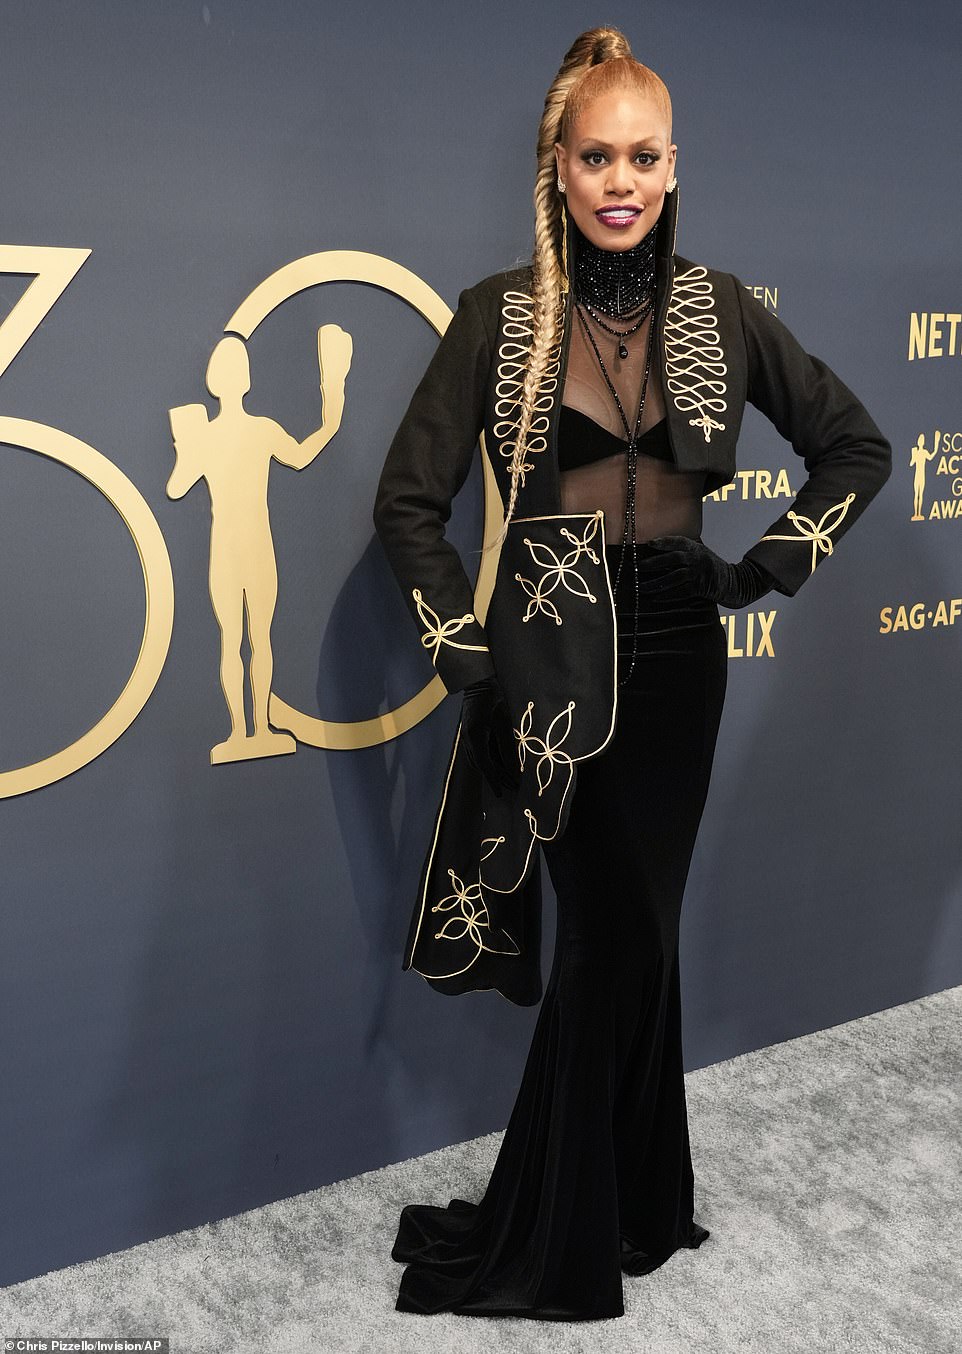 Laverne Cox was one of the first SAG Awards guests to get the fashion wrong, choosing to prioritize scandal over the overall bra-baring style.